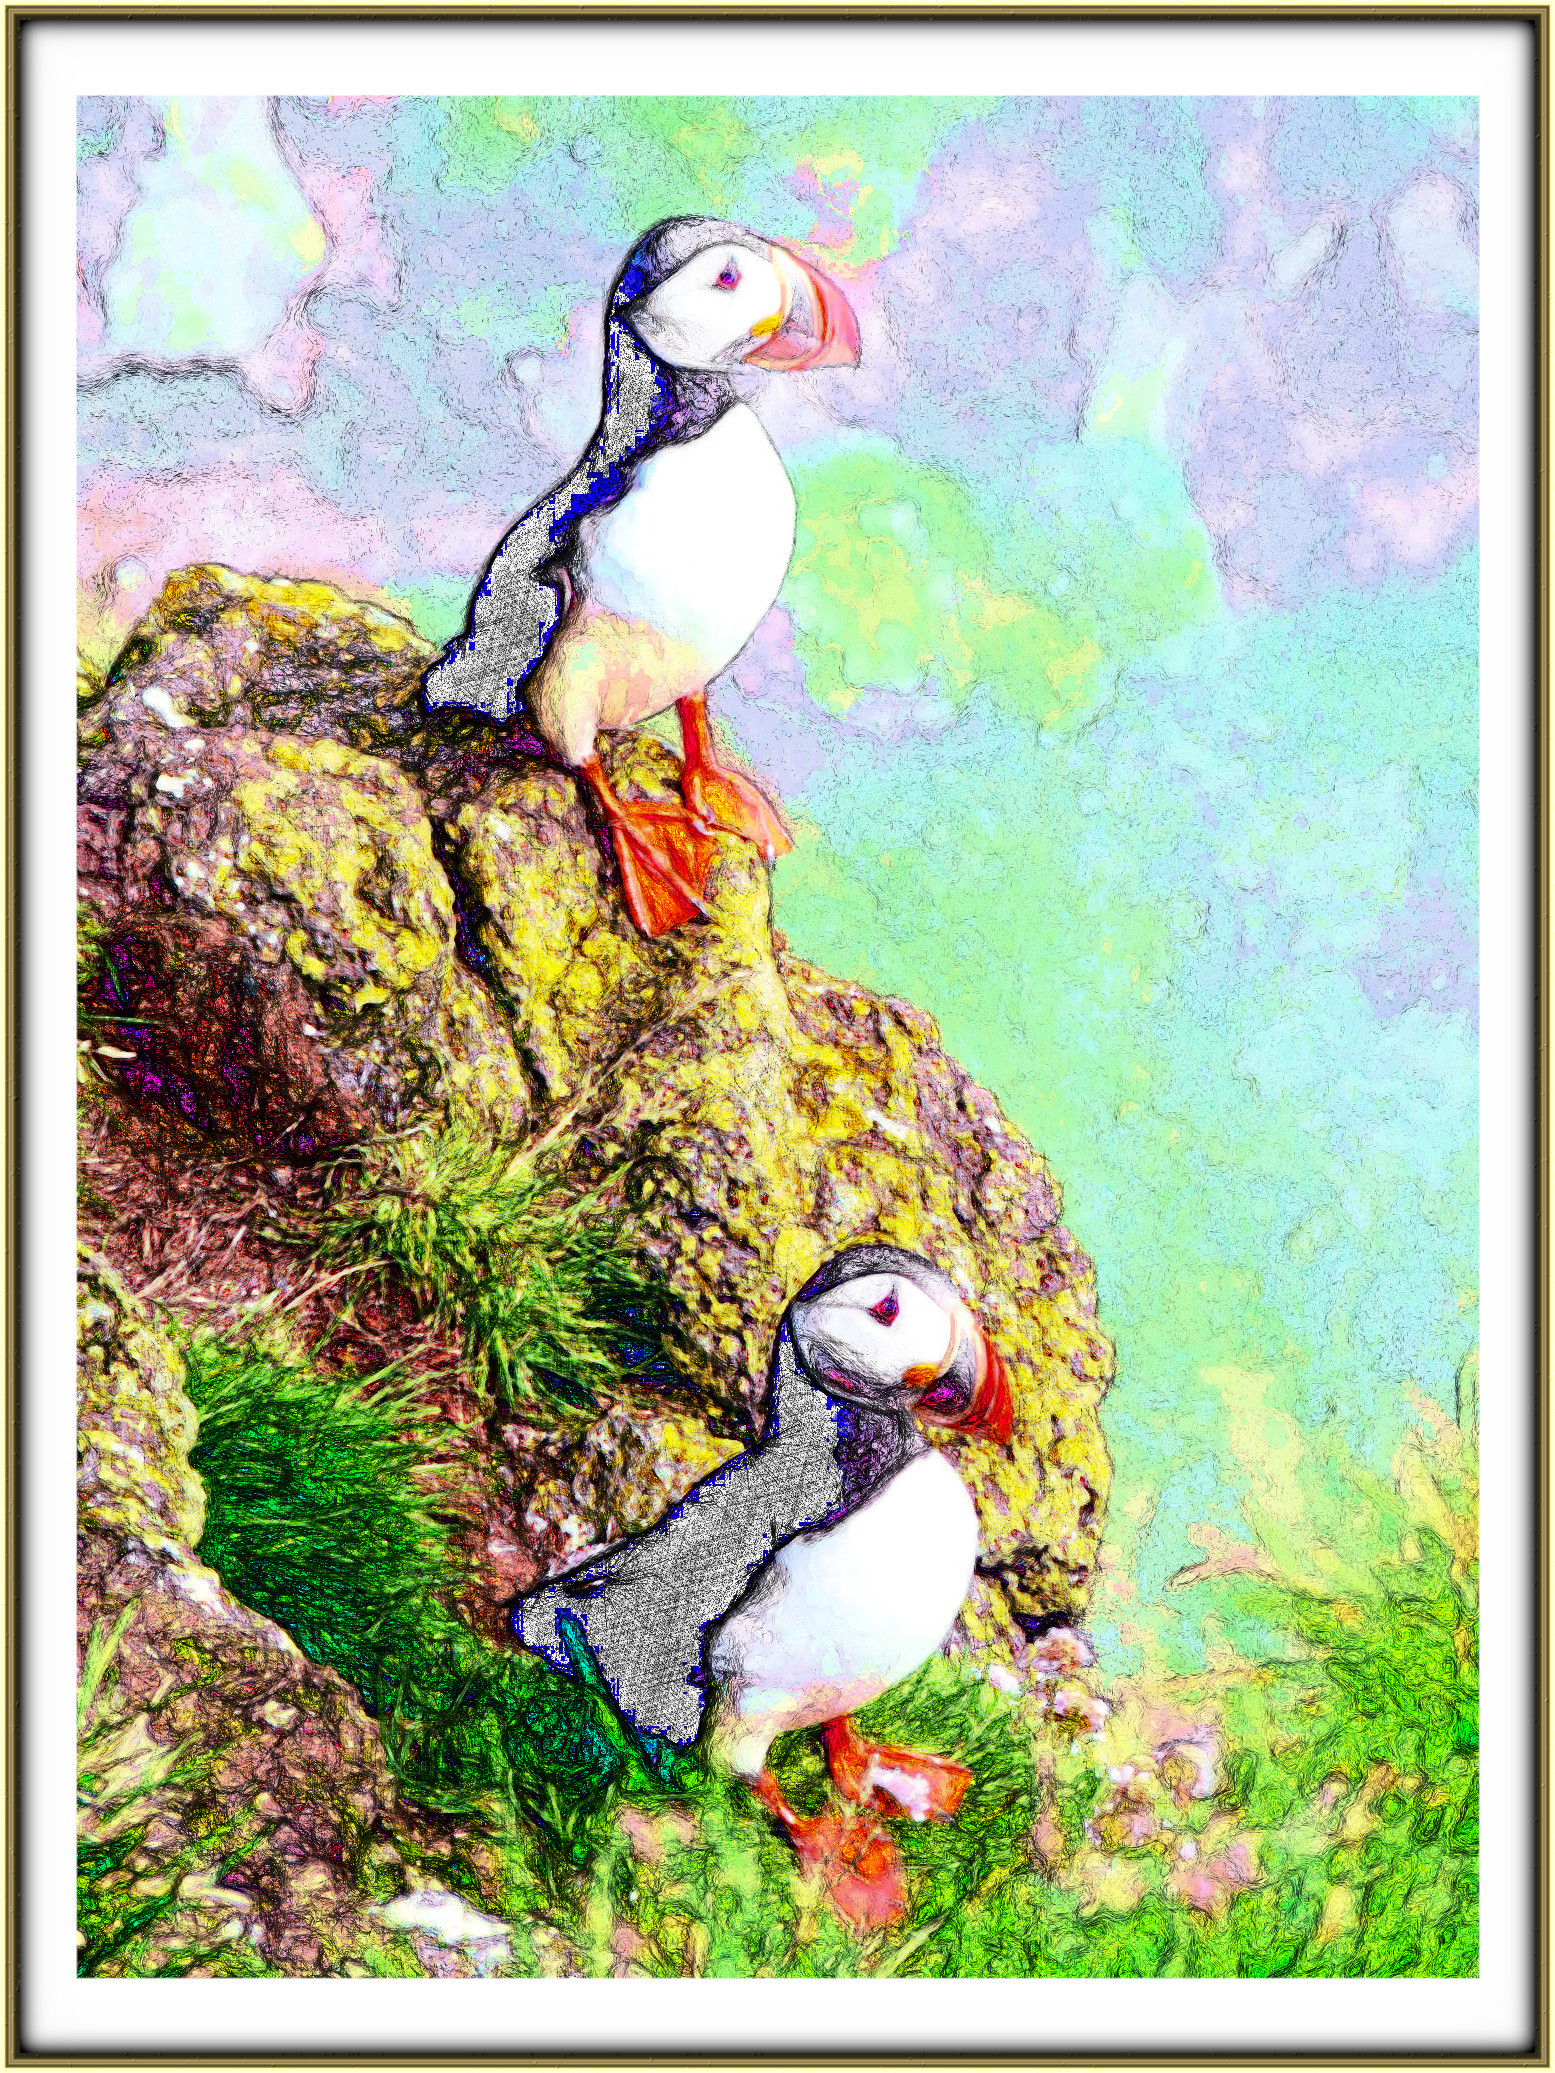 2024-01-09 08-55-27 puffin-6647068_1920 with a Drawing Effect (True,6,8,4,1).jpg